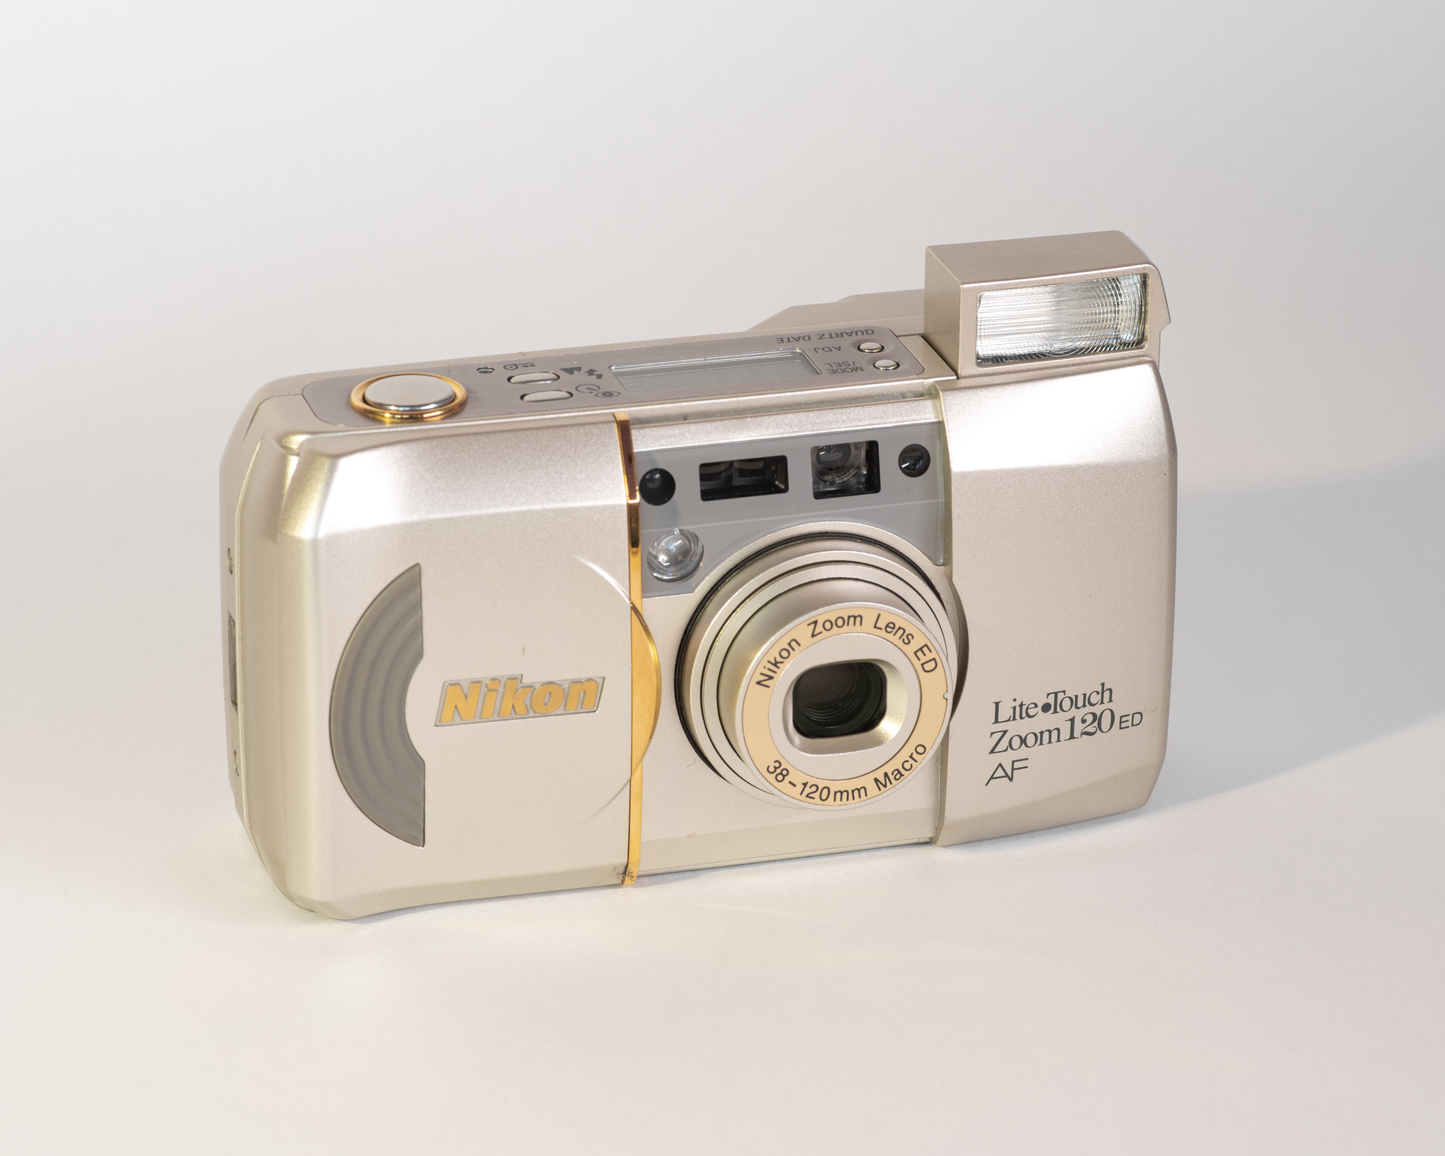 Nikon Lite Touch Zoom 120 ED AF Point & Shoot 35mm Film Camera